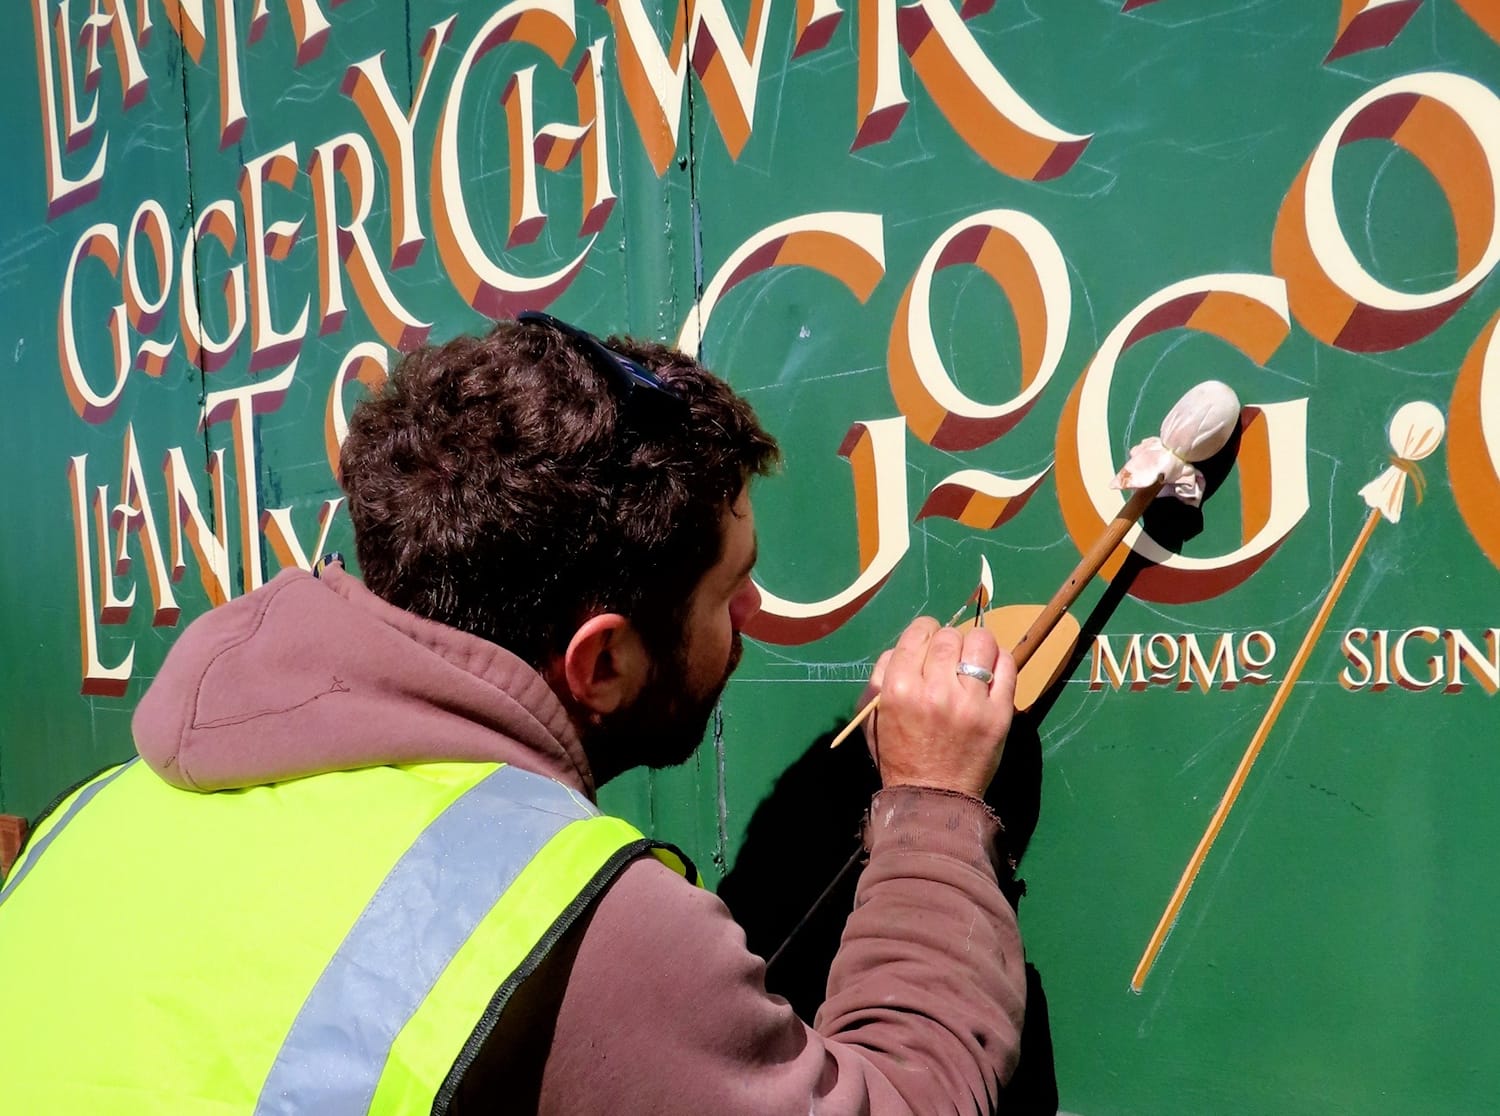 Sign painter painting with hand rested on a mahl stick. Behind is the nearly-finished sign in Roman lettering with a block shade.